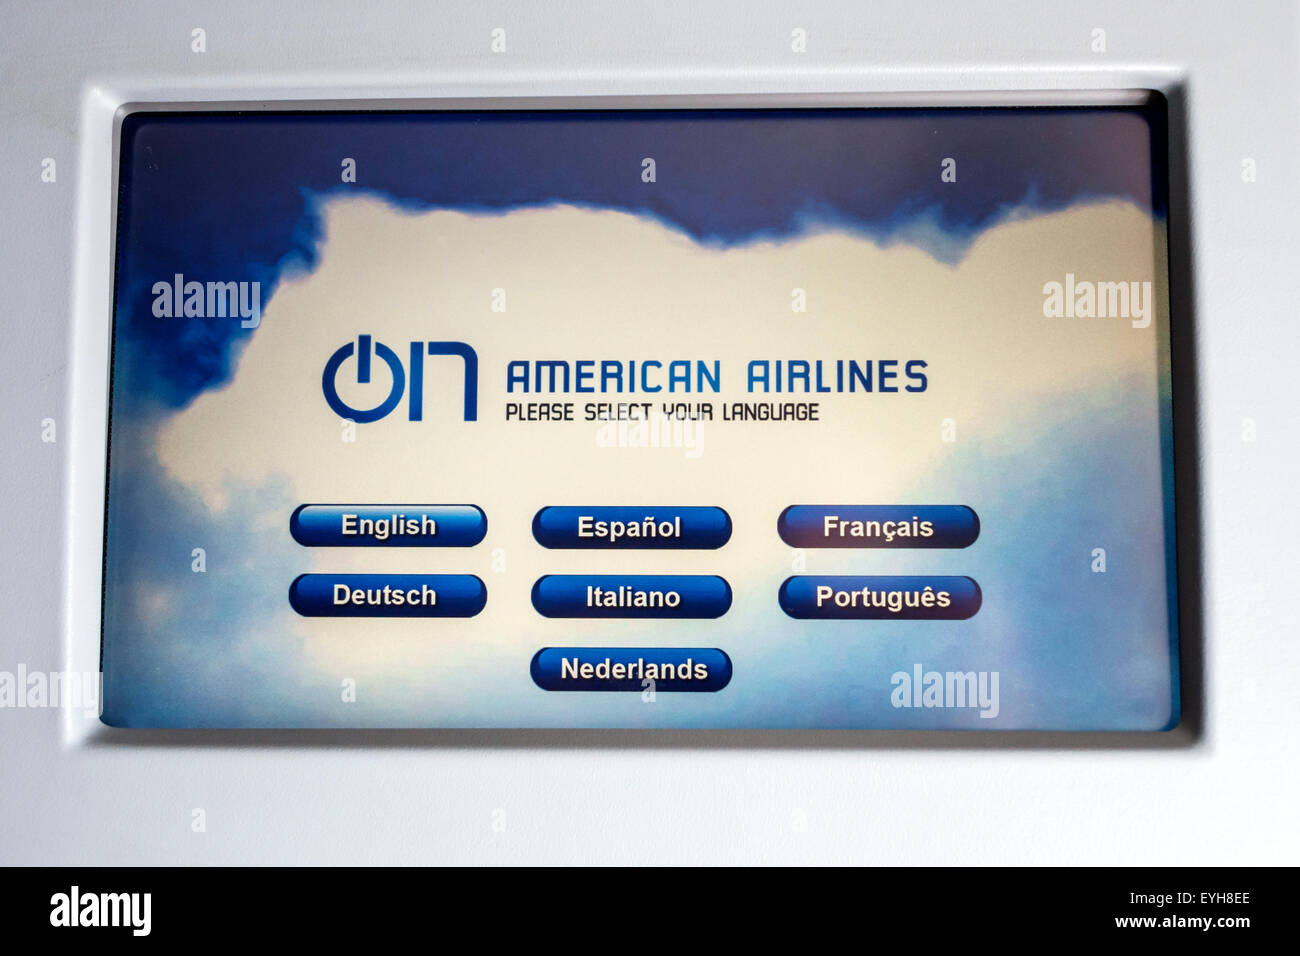 Miami Florida,International Airport,MIA,first class cabin,onboard,American Airlines,video monitor,screen,multiple languages,bilingual,multilingual,FL1 Stock Photo